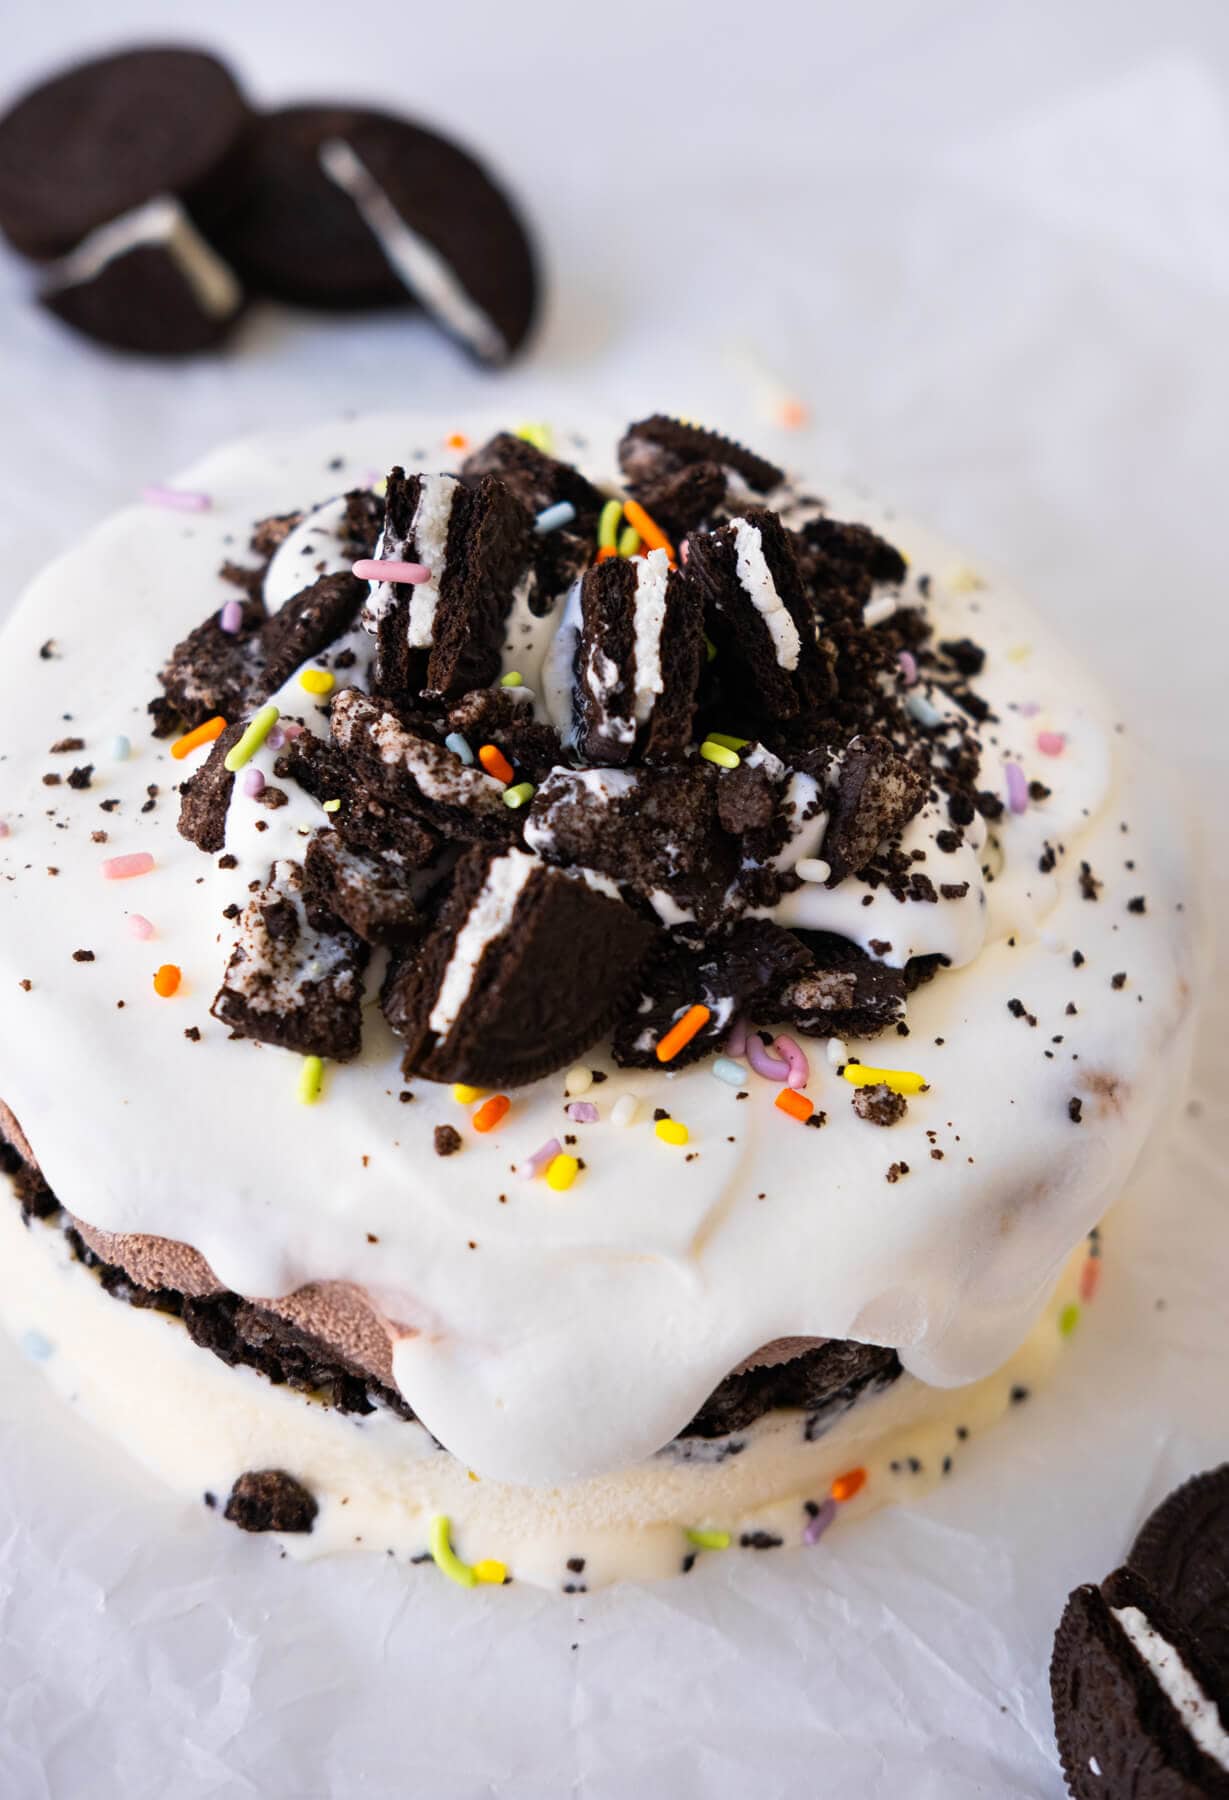 Ice cream cake filled with Oreo crumbs and topped with cookies and sprinkles.